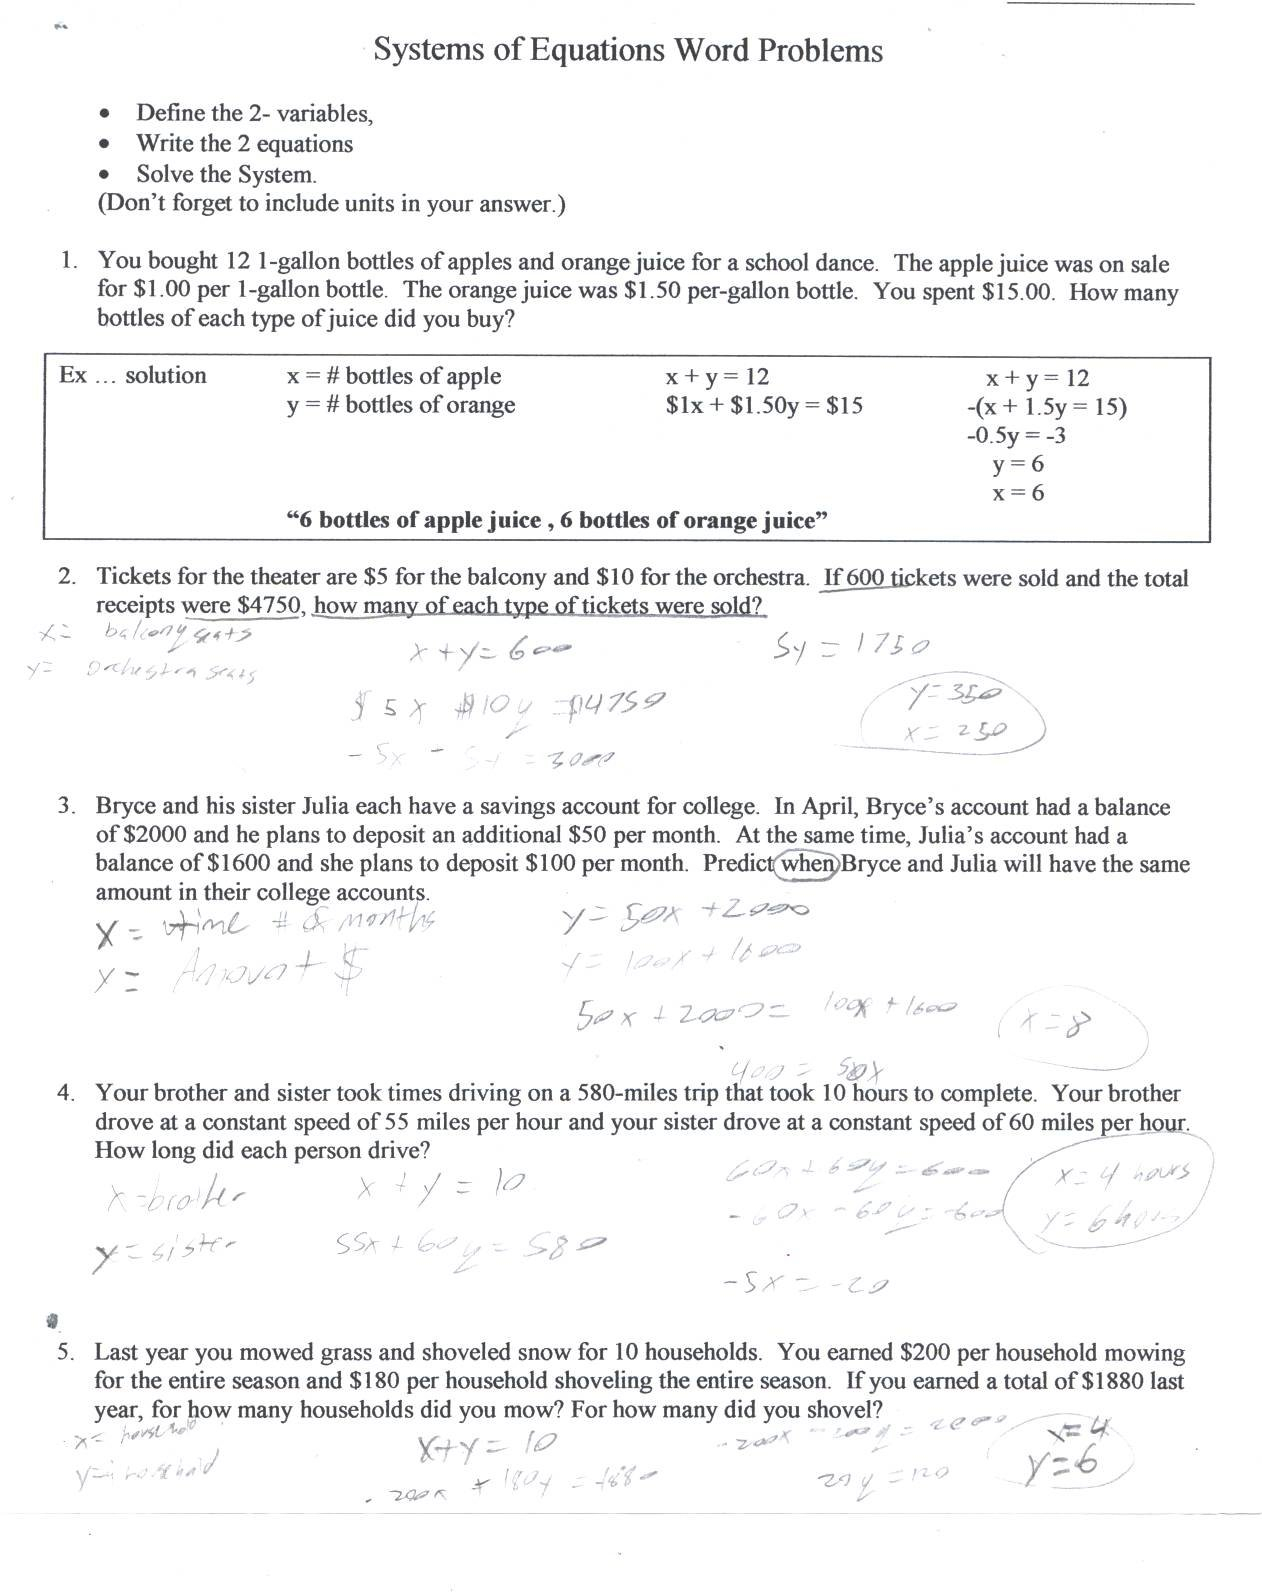 Avid 12 Algebra 2 Algebra 1A With Mr Inside Solving Word Problems Using Systems Of Equations Worksheet Answers